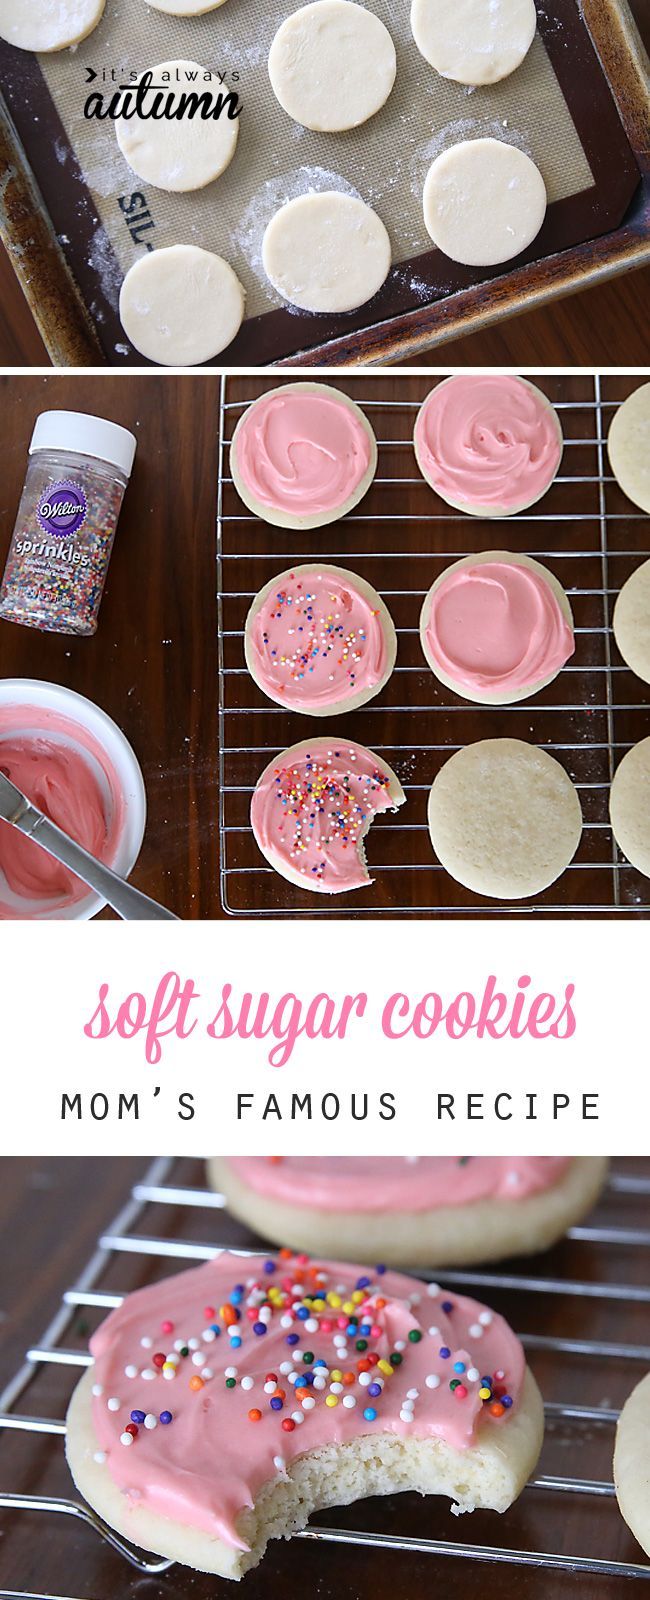 This is, hands down, the best soft sugar cookie recipe, complete with amazing cream cheese frosting. So much better than